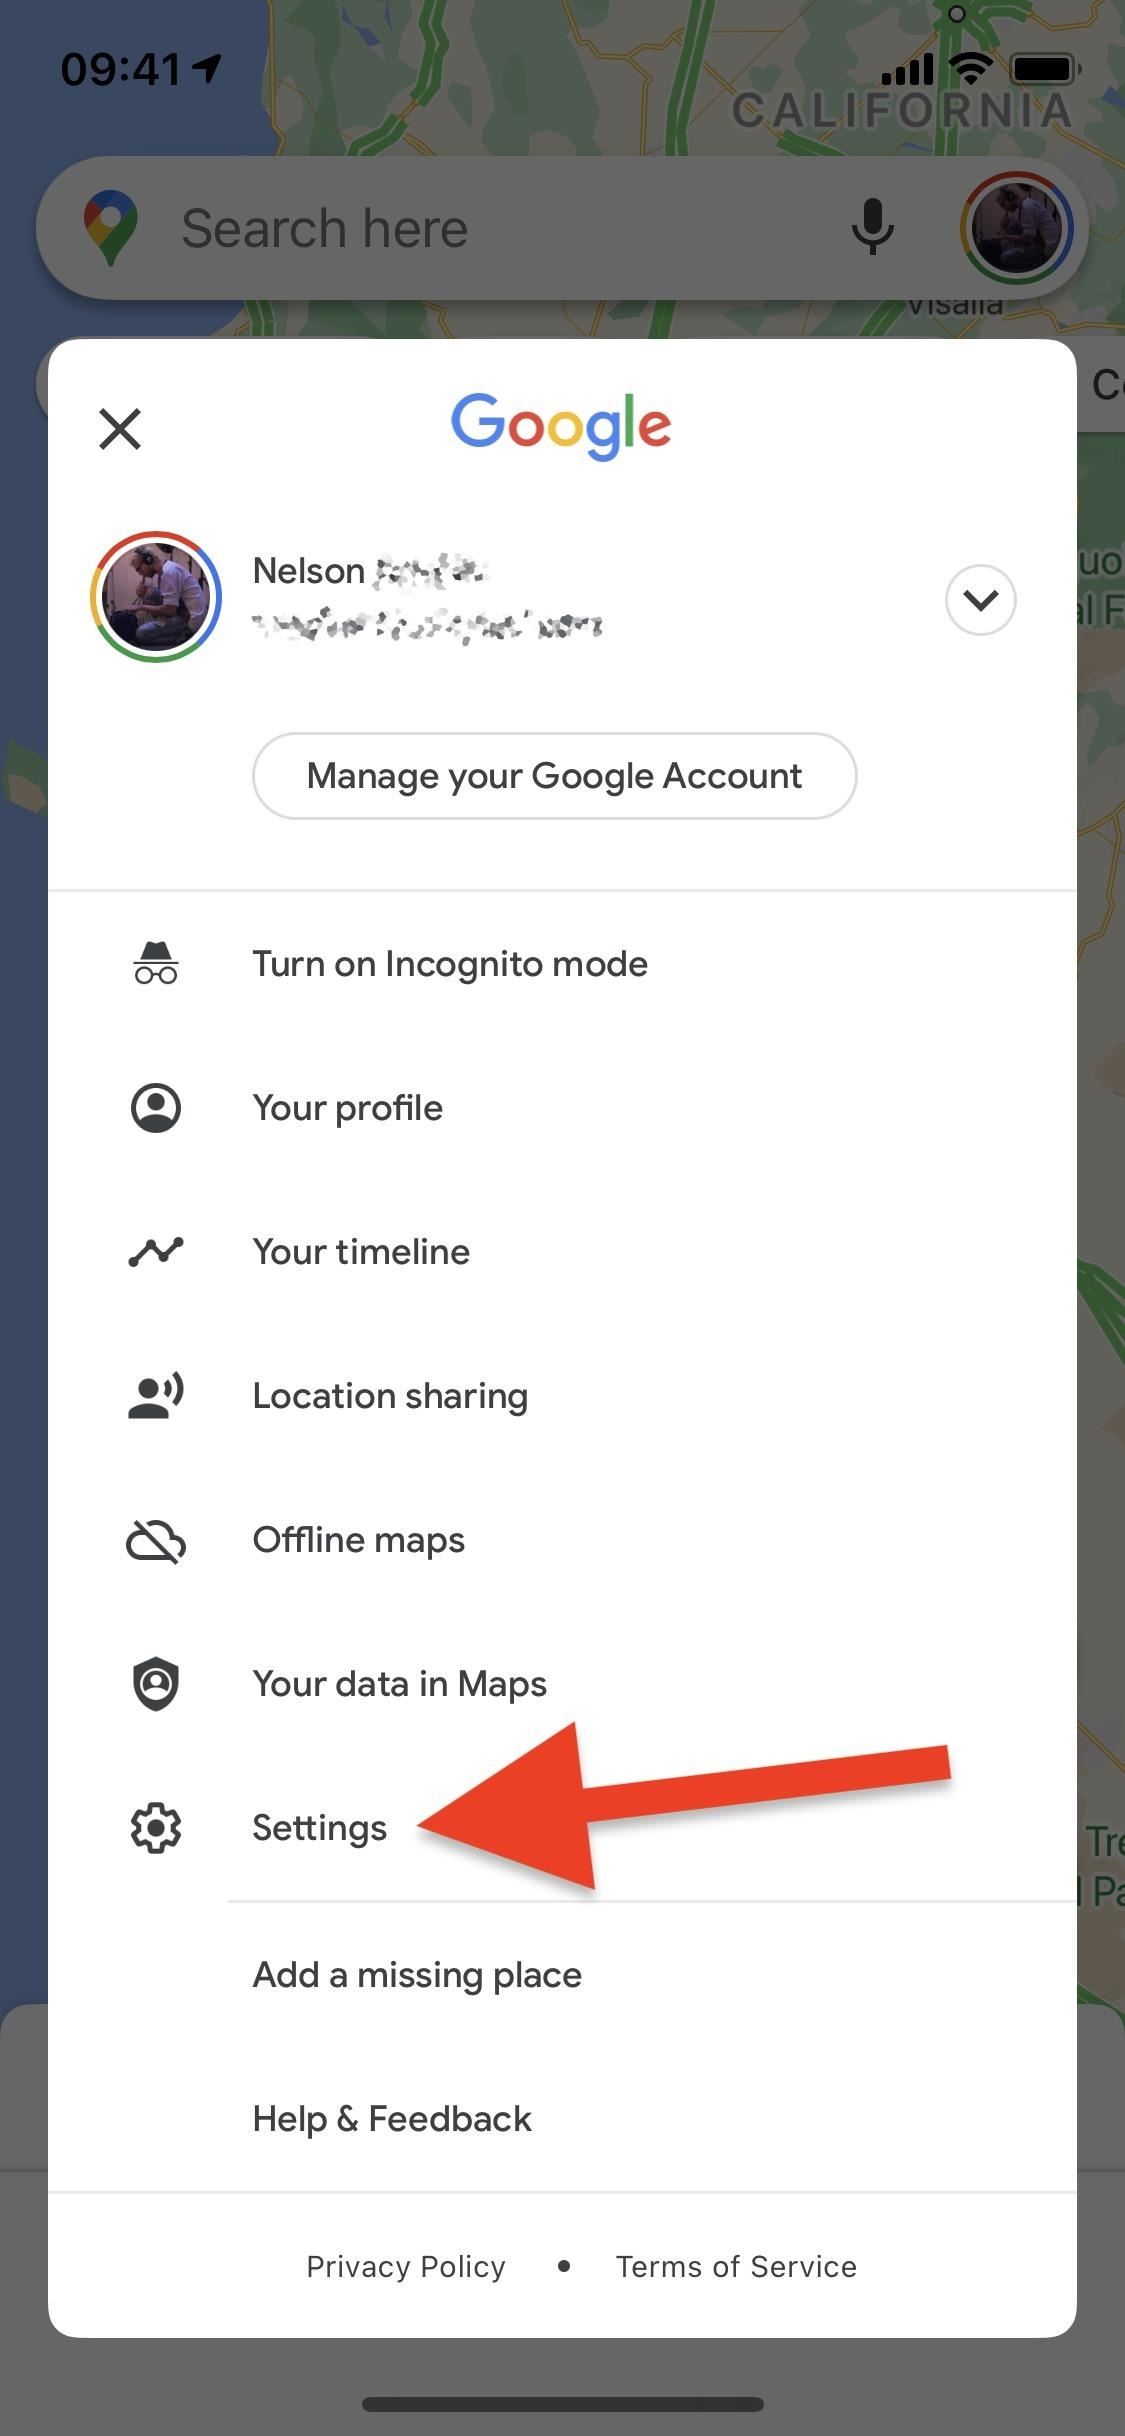 How to Disable or Delete Your Location History in Google Maps for More Privacy